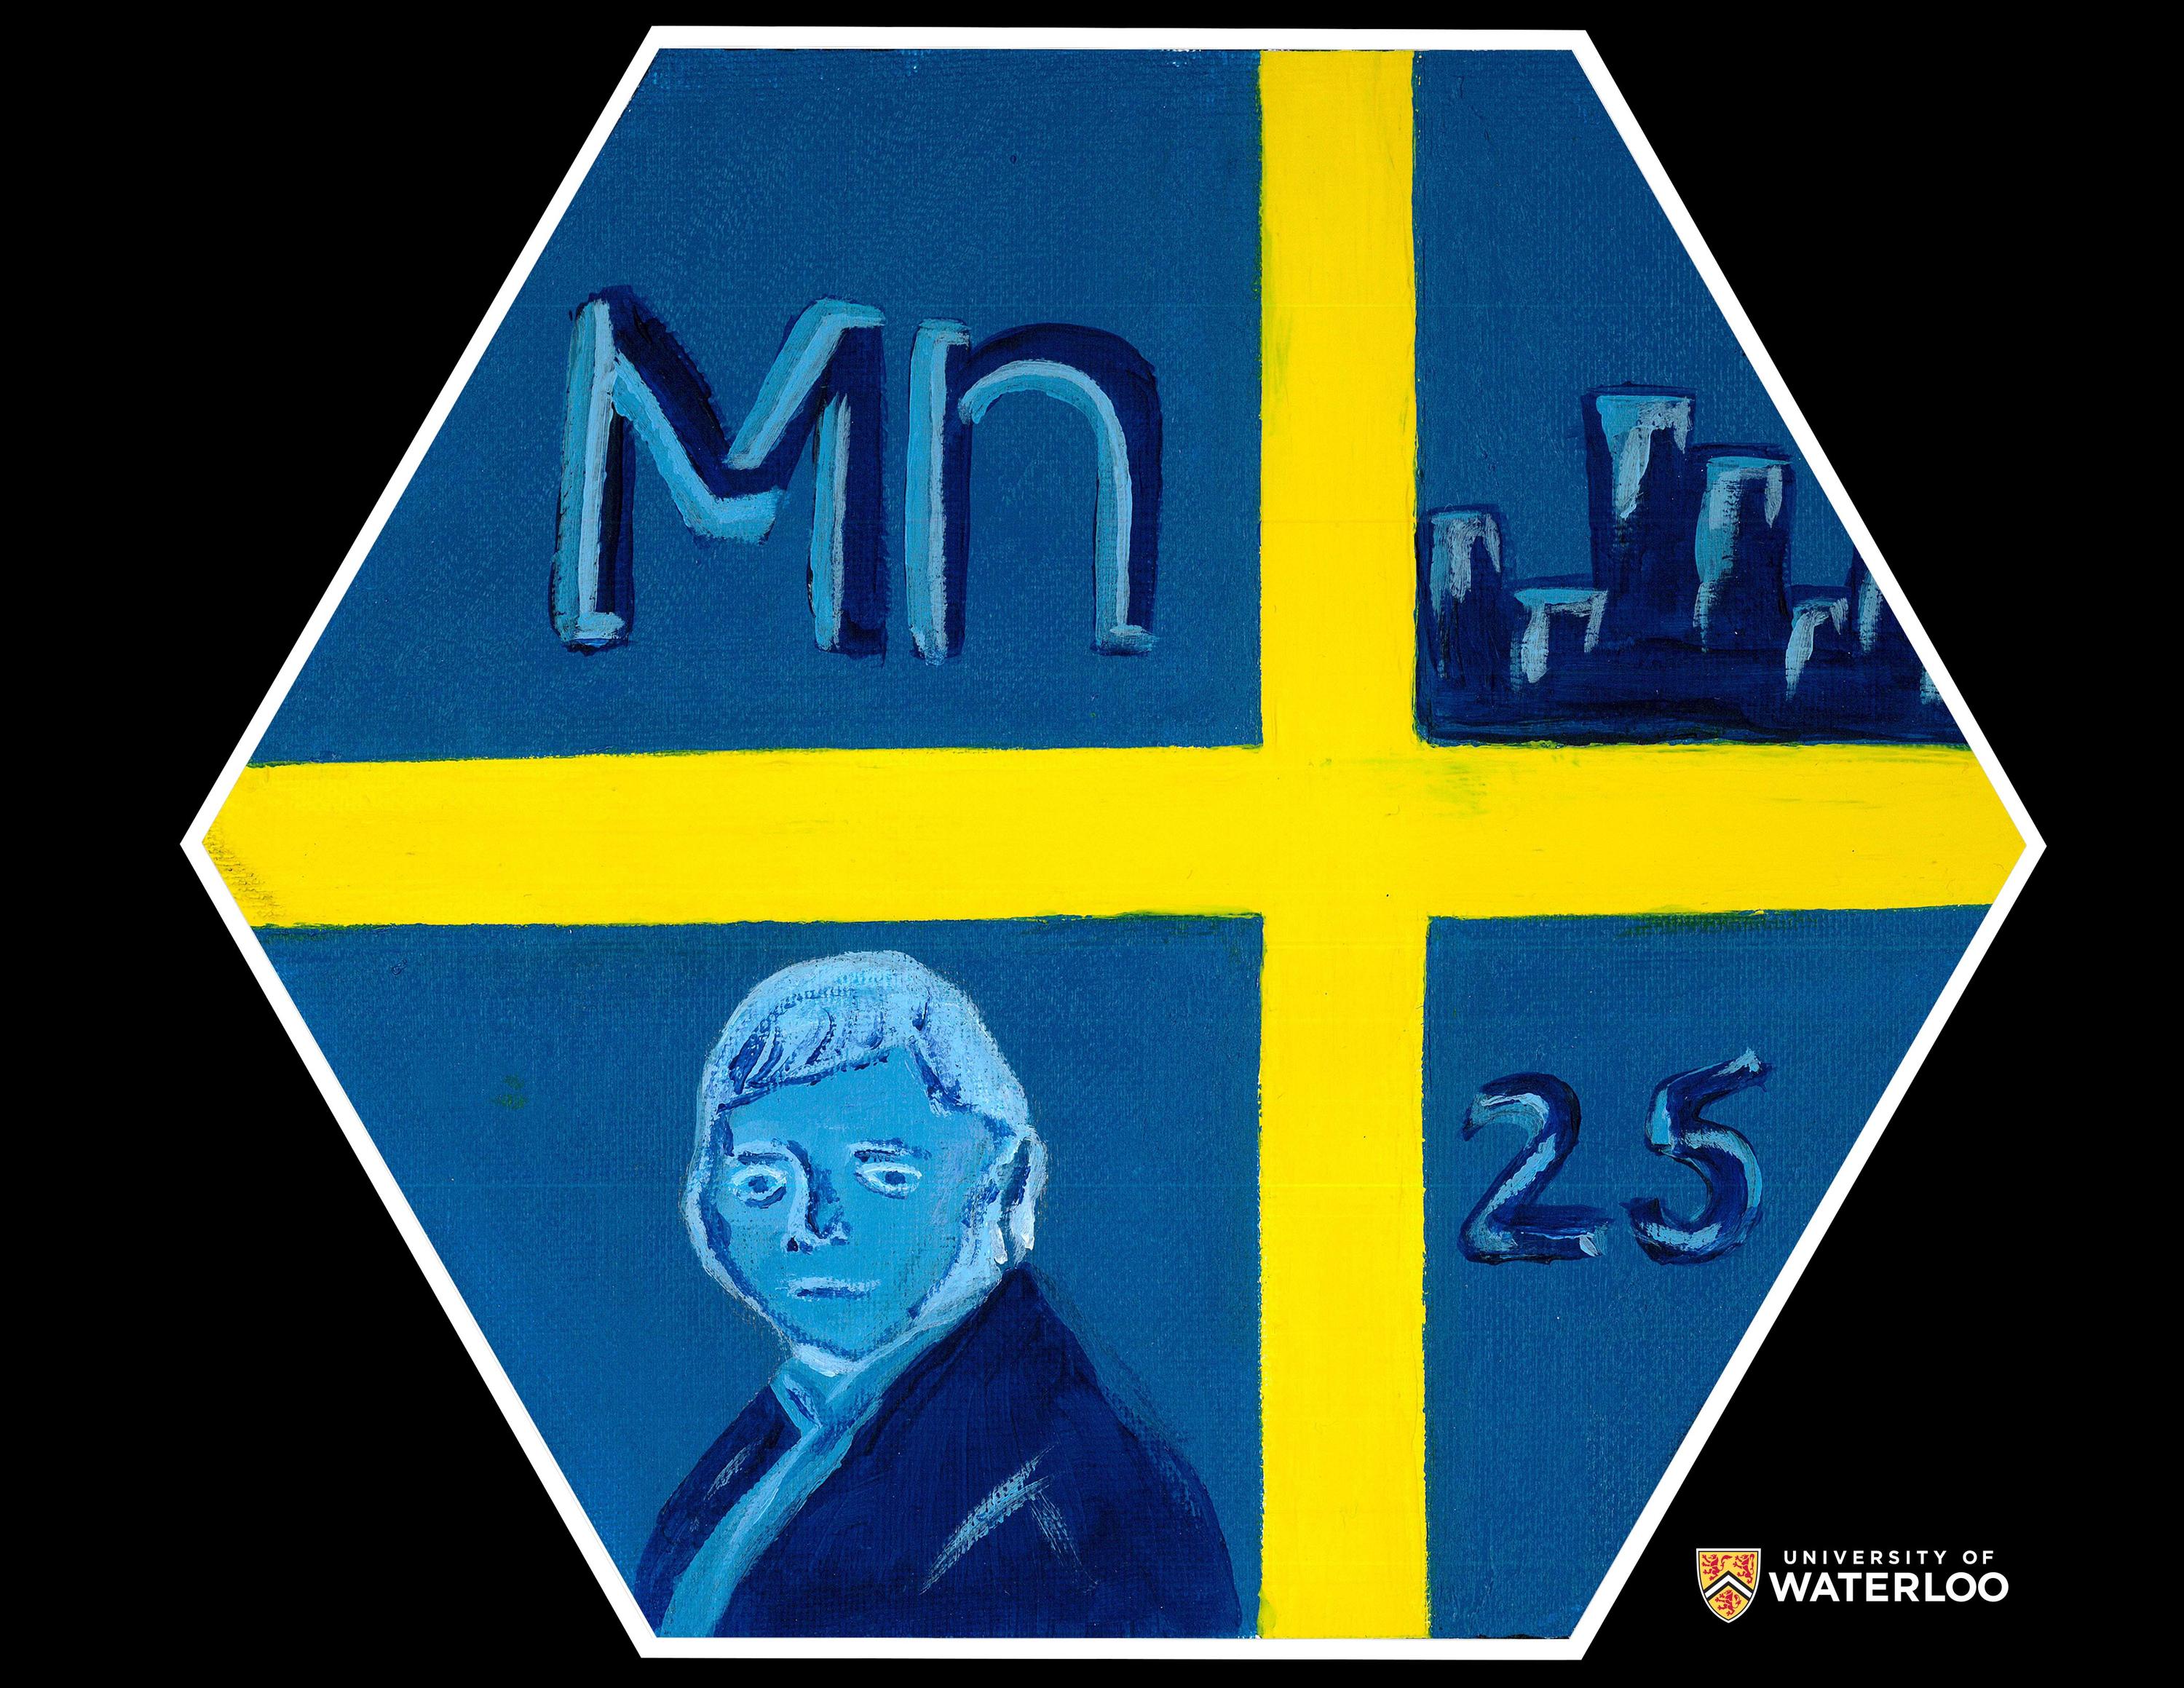 Acrylic on blue background. Tile appears as the Swedish flag divided into four frames using a bold yellow cross. All images are illustrated in dark and light blues. Upper left is the chemical symbol “Mn”; upper right a city-scape of buildings; lower left portrait of Johan Gottlieb Gahn; lower right the atomic number 25.